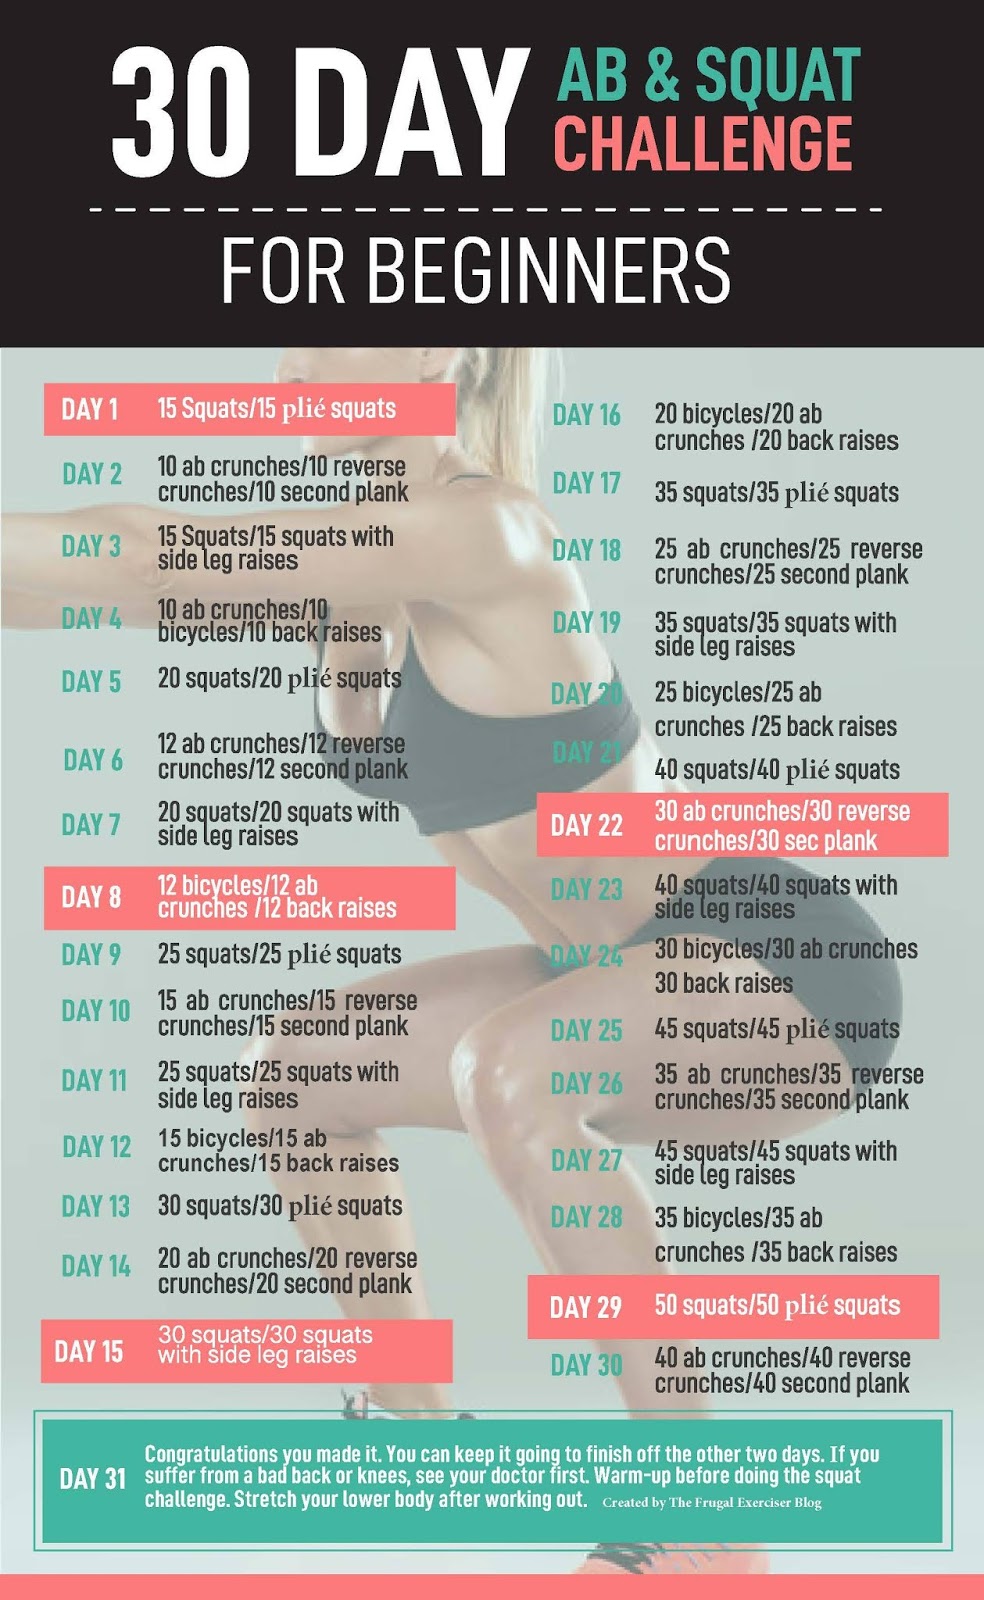 30 Day Ab and Squat Challenge for Beginners